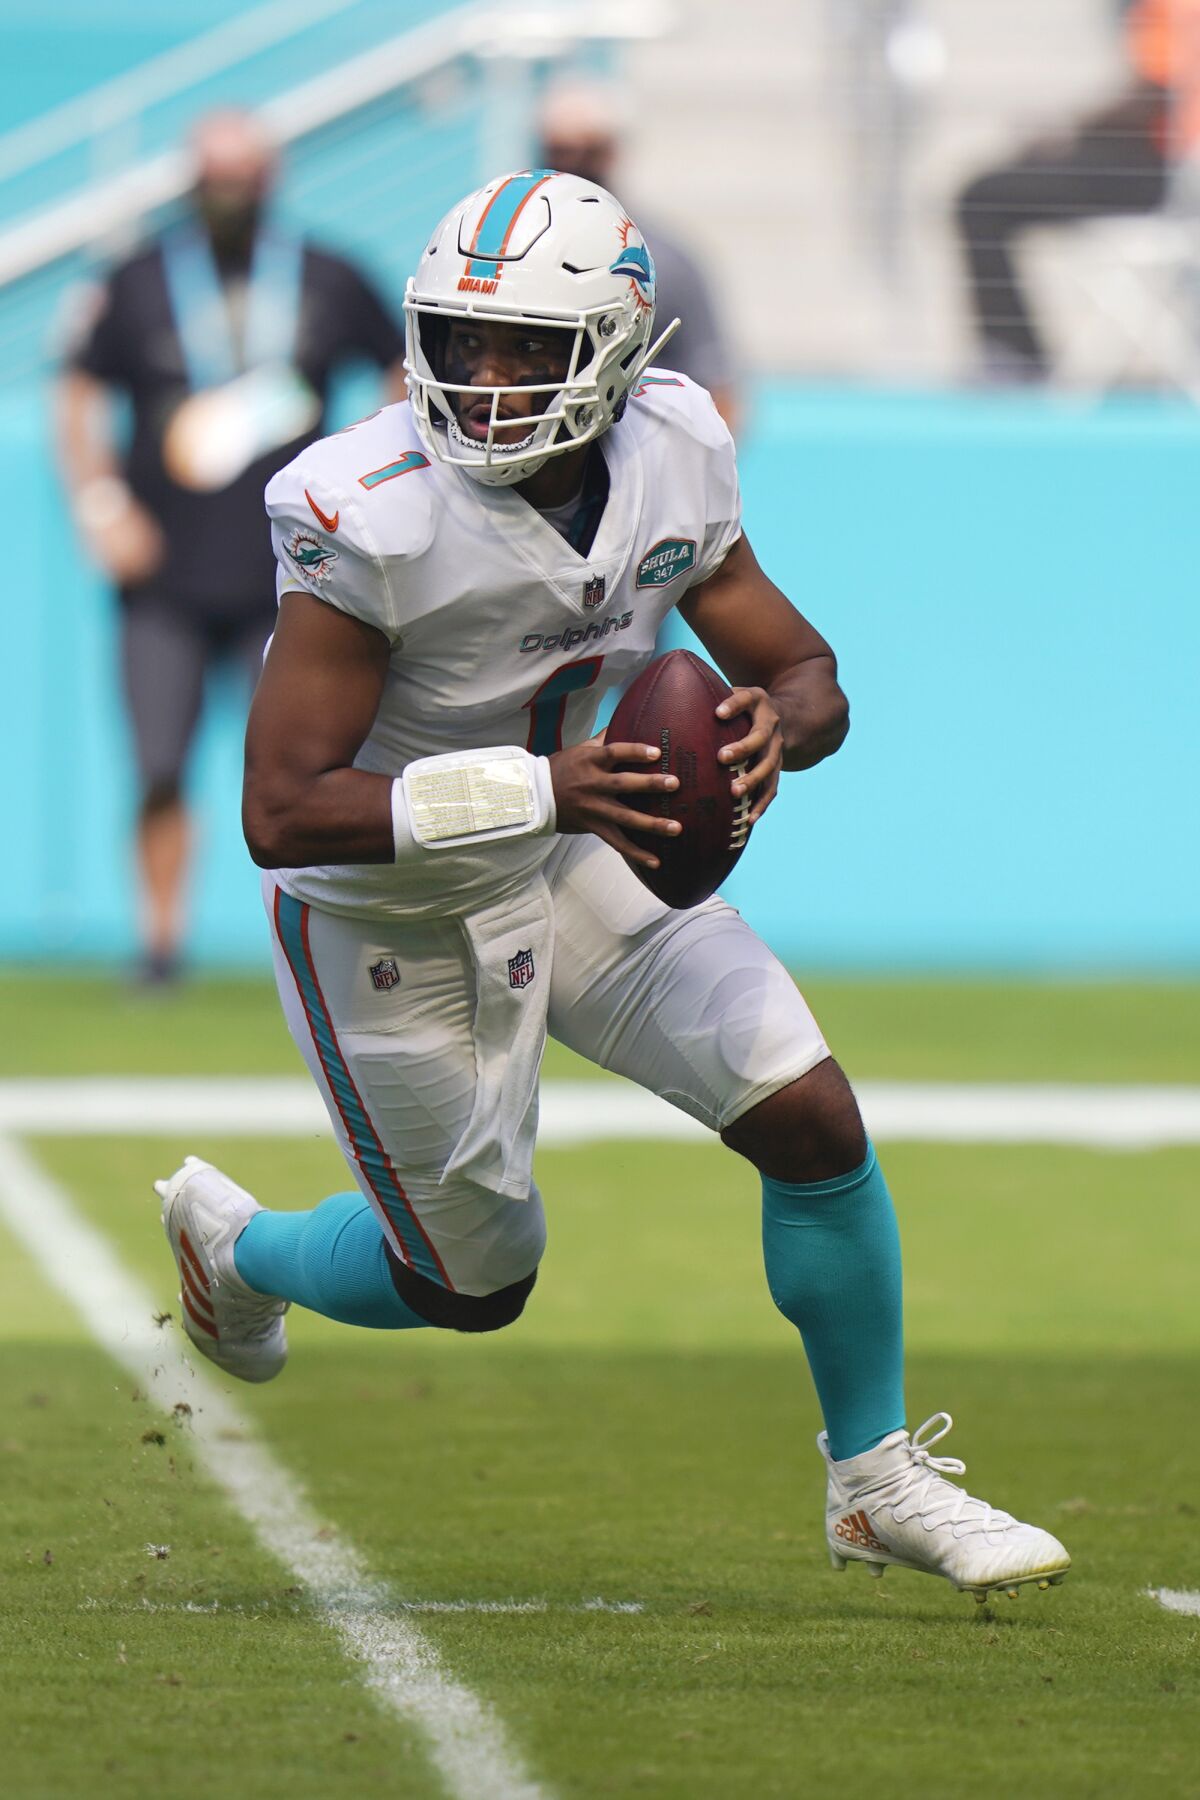 Miami Dolphins quarterback Tua Tagovailoa (1) looks to pass the ball during the first half of an NFL football game against the Los Angeles Rams, Sunday, Nov. 1, 2020, in Miami Gardens, Fla. The L.A. Chargers play at Miami on Sunday. (AP Photo/Wilfredo Lee)